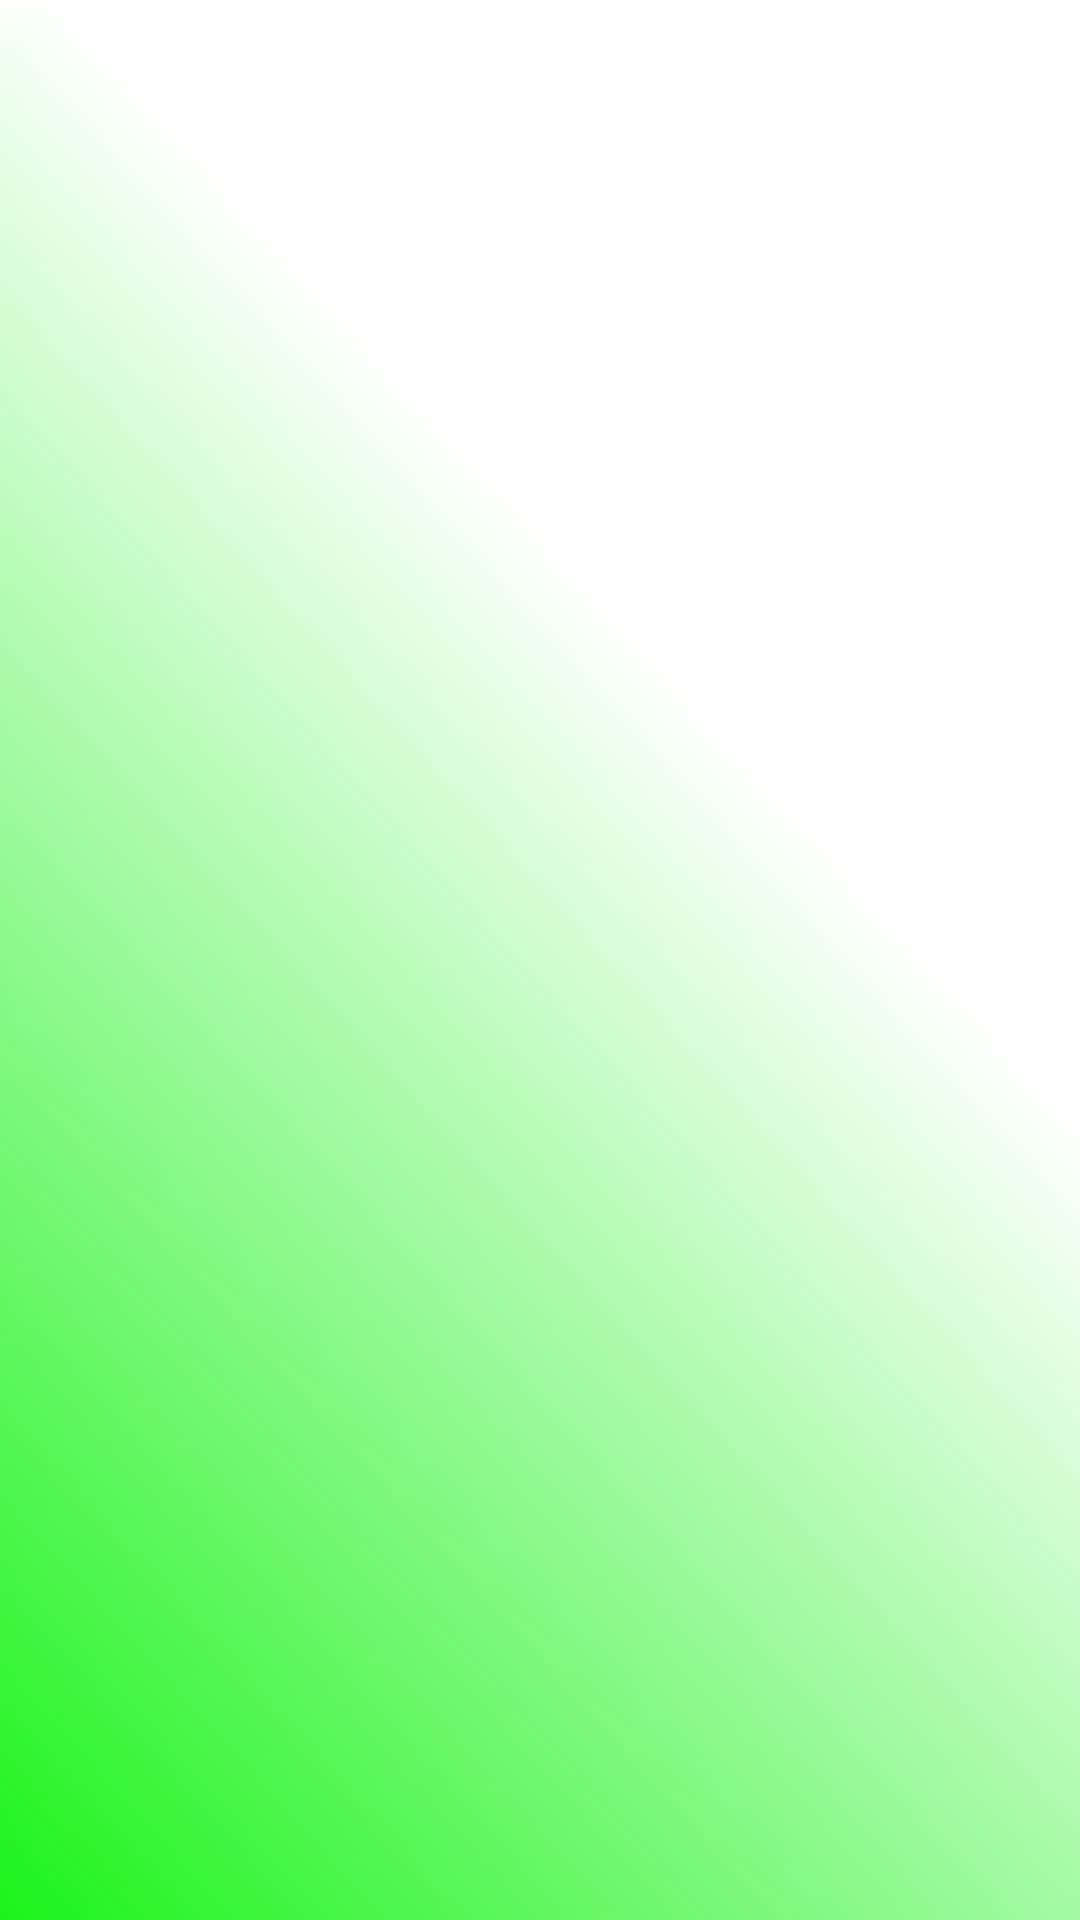 Get lost in a sea of green with this lively gradient background